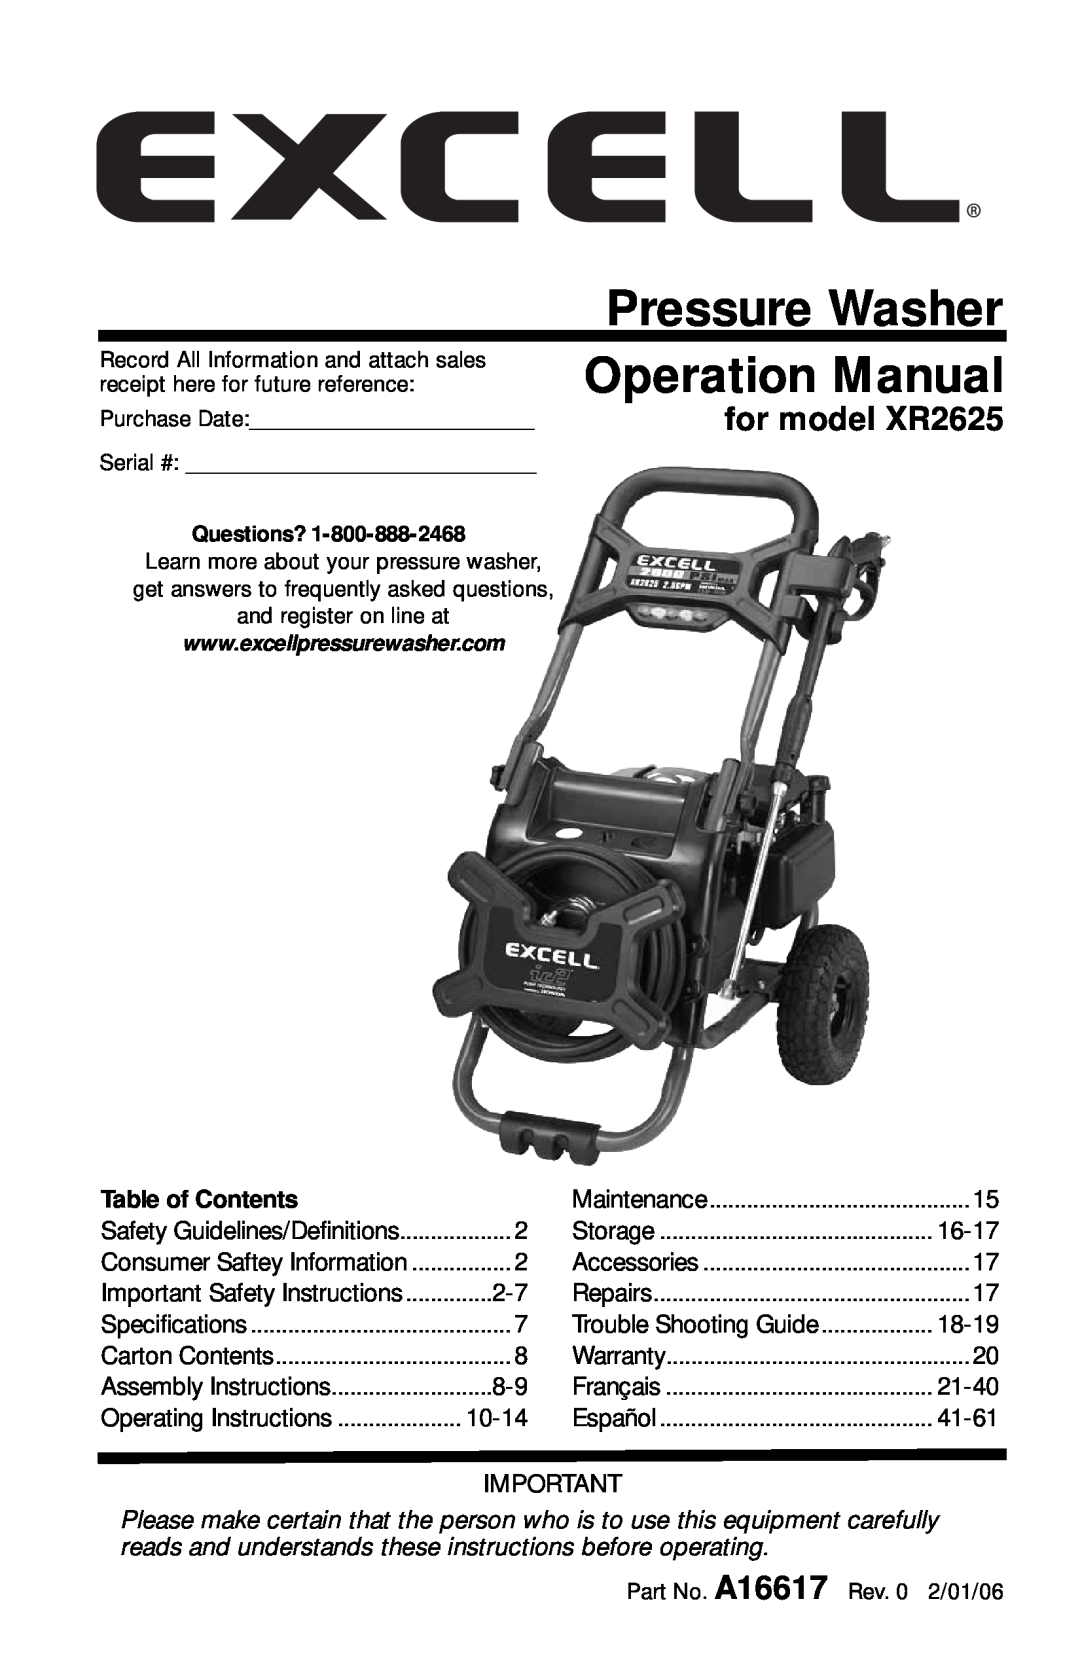 DeVillbiss Air Power Company A16617 operation manual Pressure Washer, Operation Manual, for model XR2625 